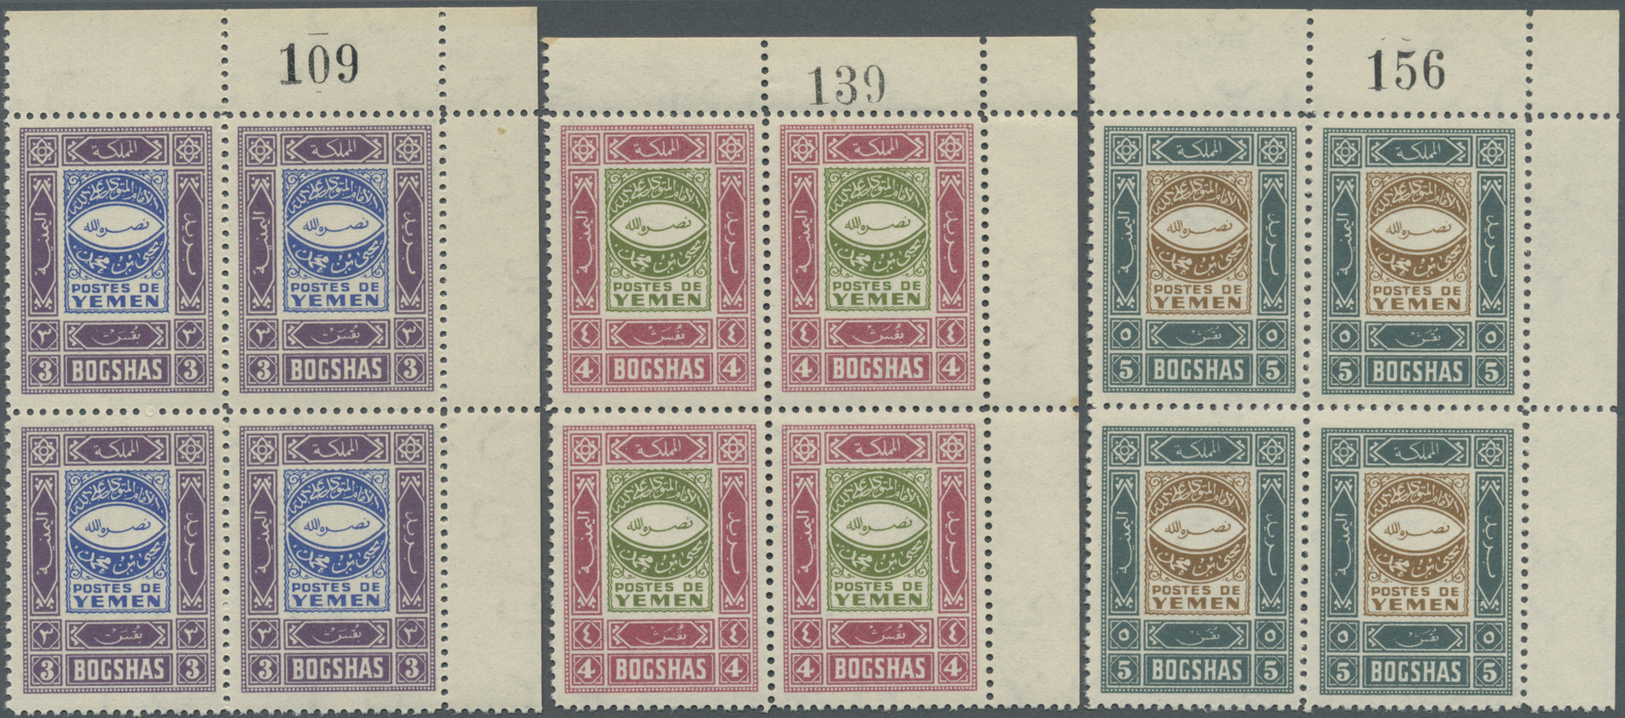 ** Jemen: 1940, Definitives "Ornaments", ½b. to 1i., complete set of 13 values as plate blocks from the upper right corn